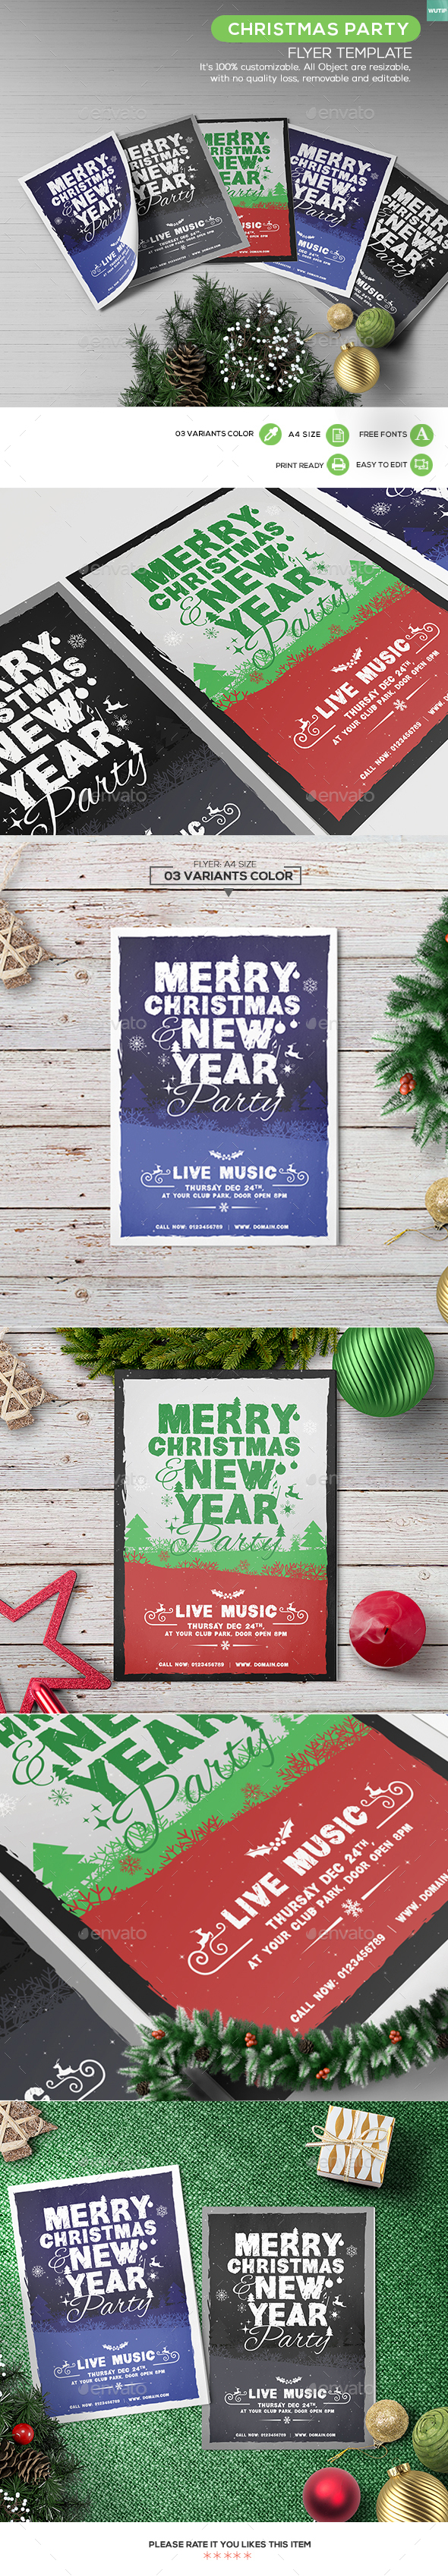 Christmas Party - Flyer Template 04